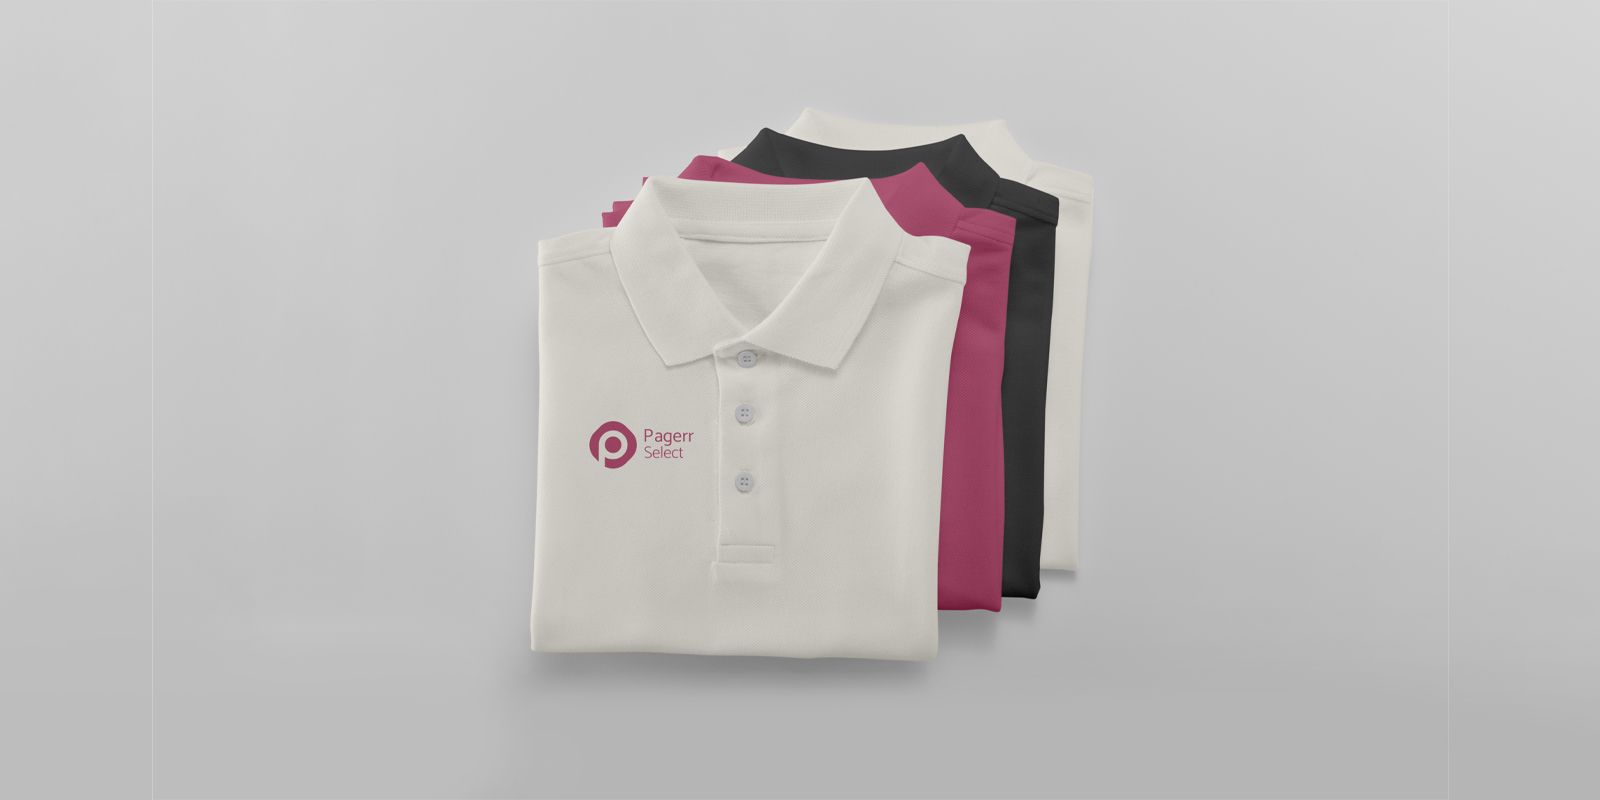 Polo shirts in Brisbane - Print with Pagerr